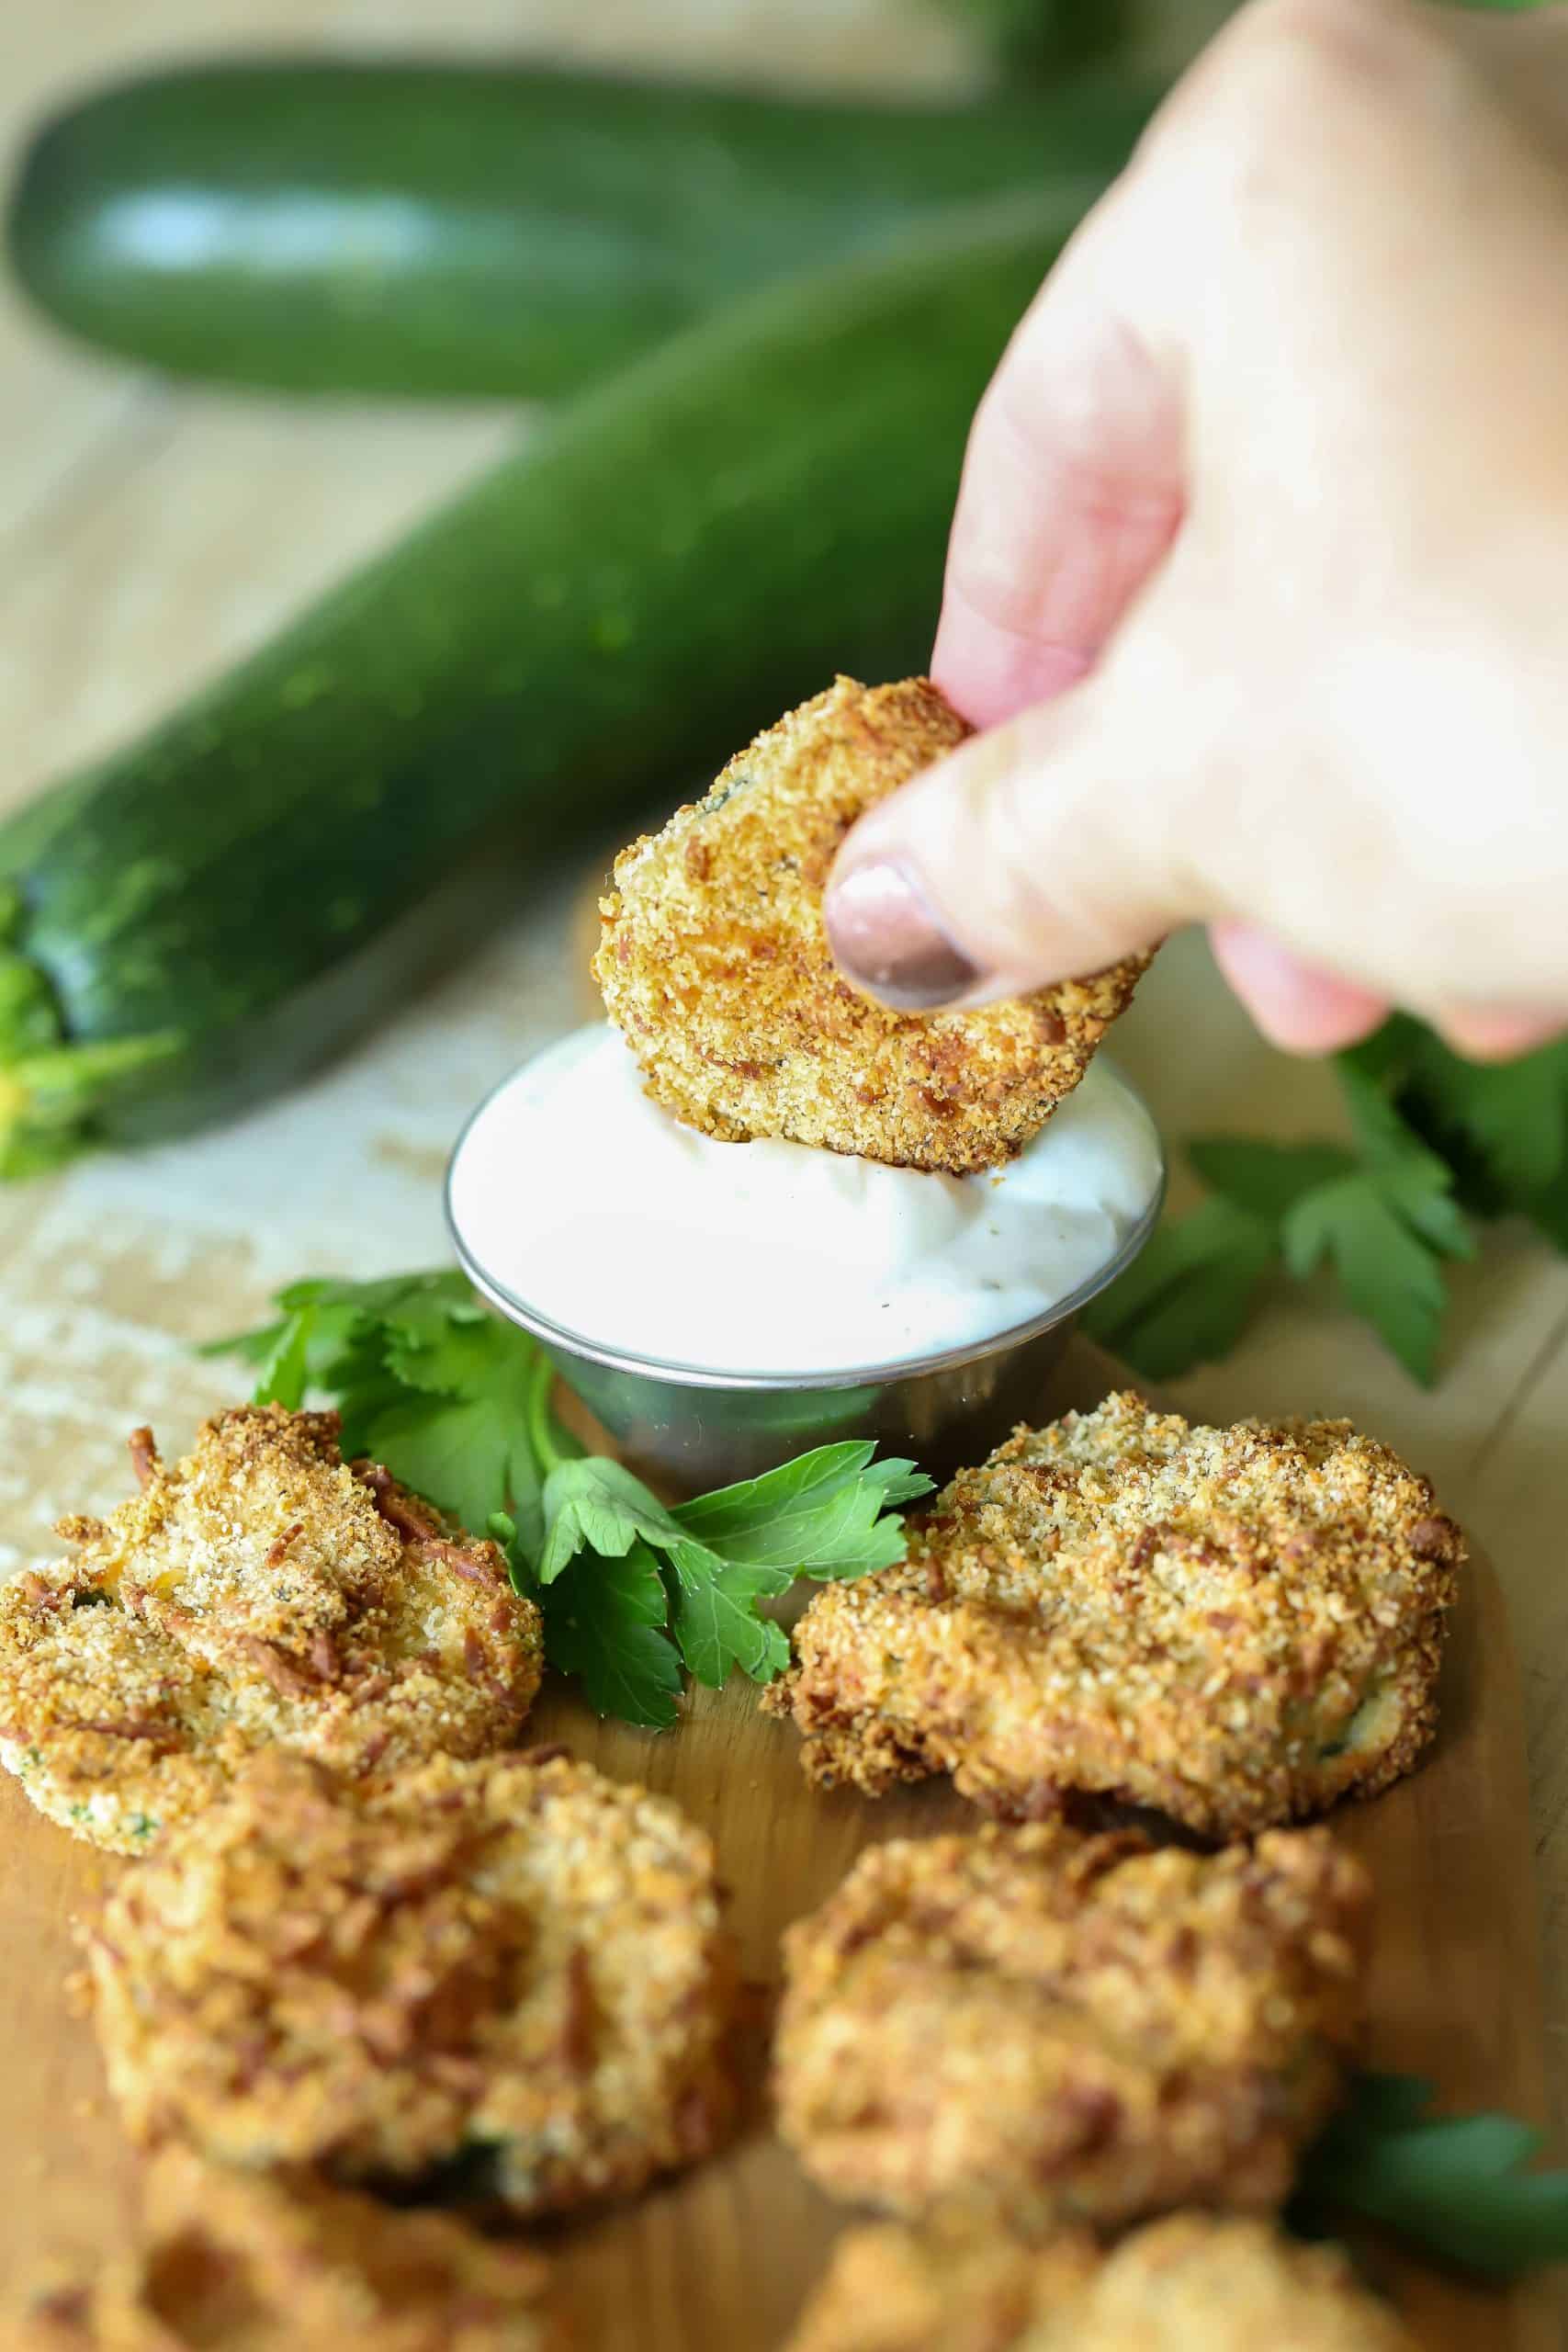 Easy Air Fryer Zucchini Chips are the perfect snack or side dish. Serve with a healthy Greek yogurt and ranch dipping sauce, and you won't stop snacking on them! #airfryer #appetizer #snack #zucchini #healthyrecipe #healthy via @jennikolaus